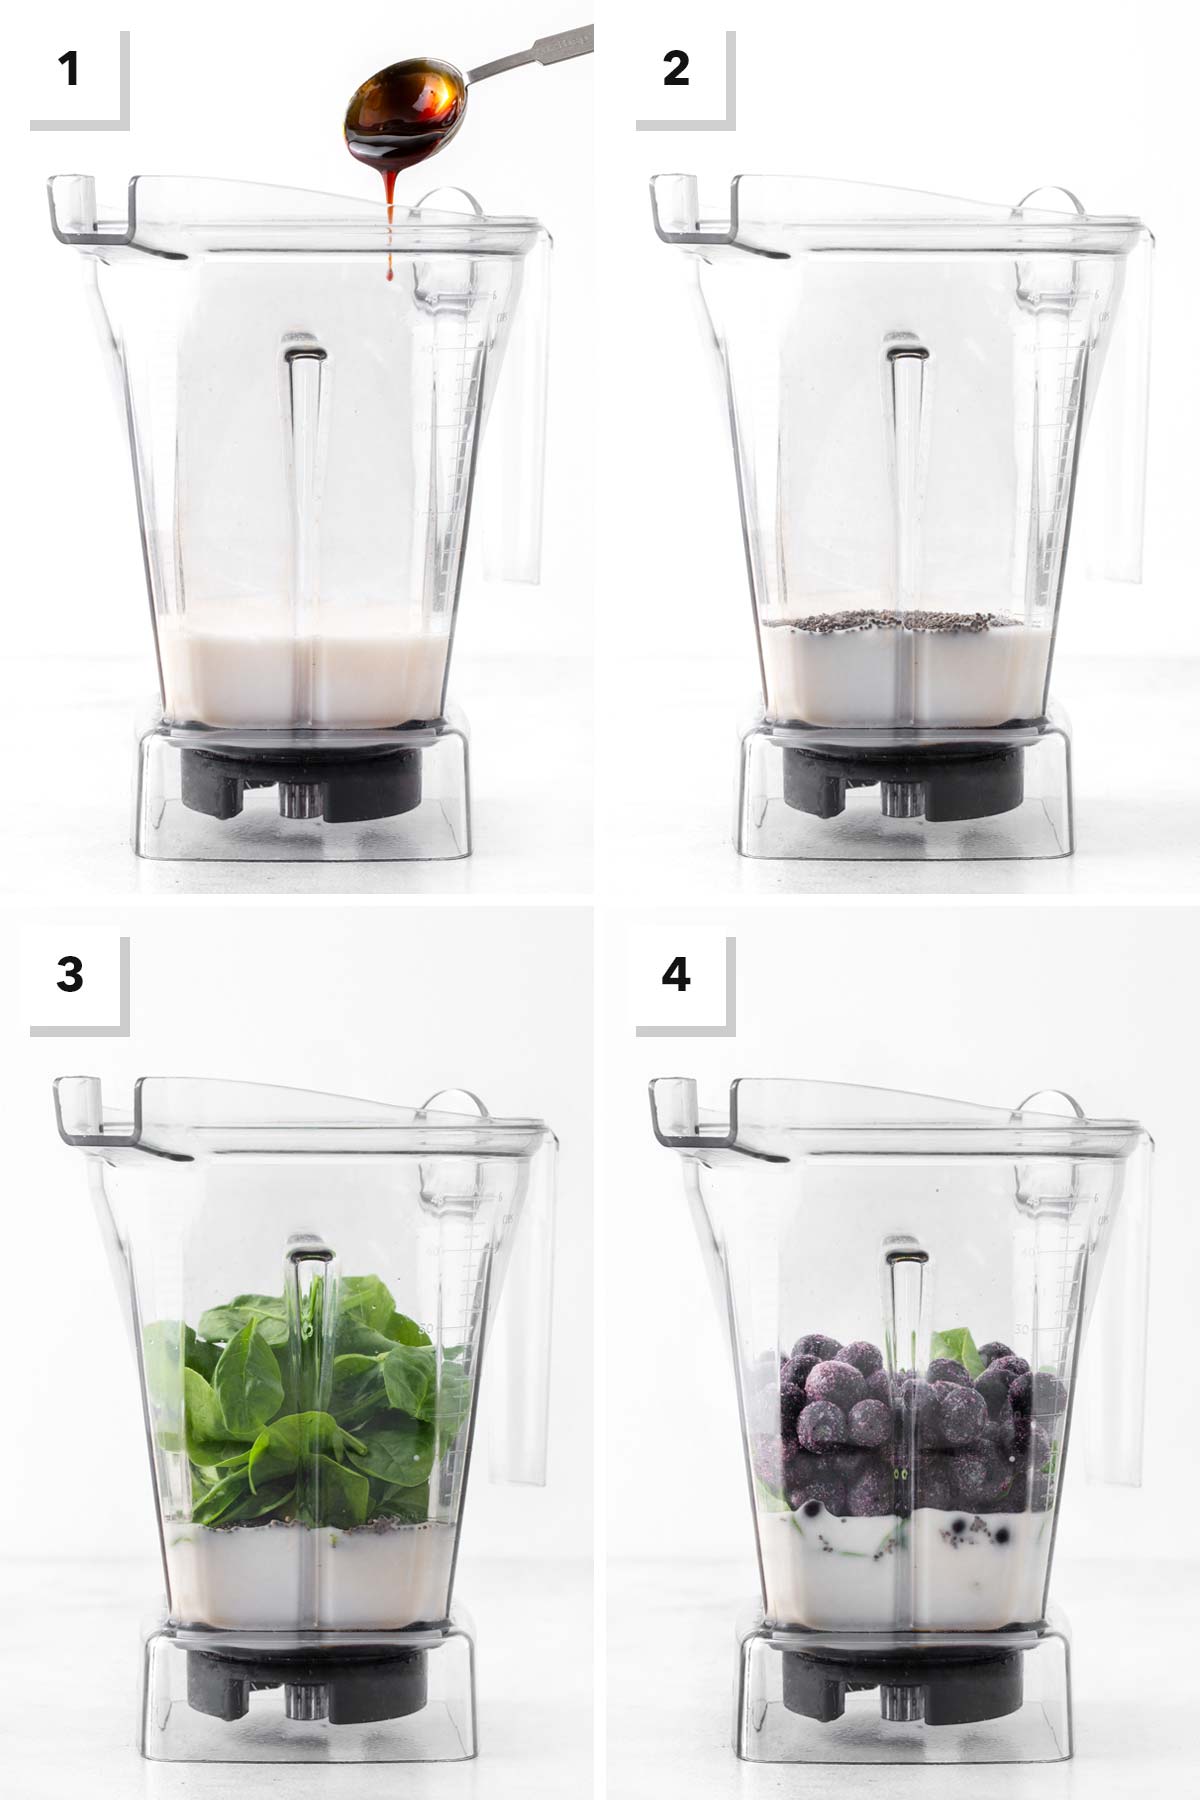 Steps for making a blueberry smoothie.